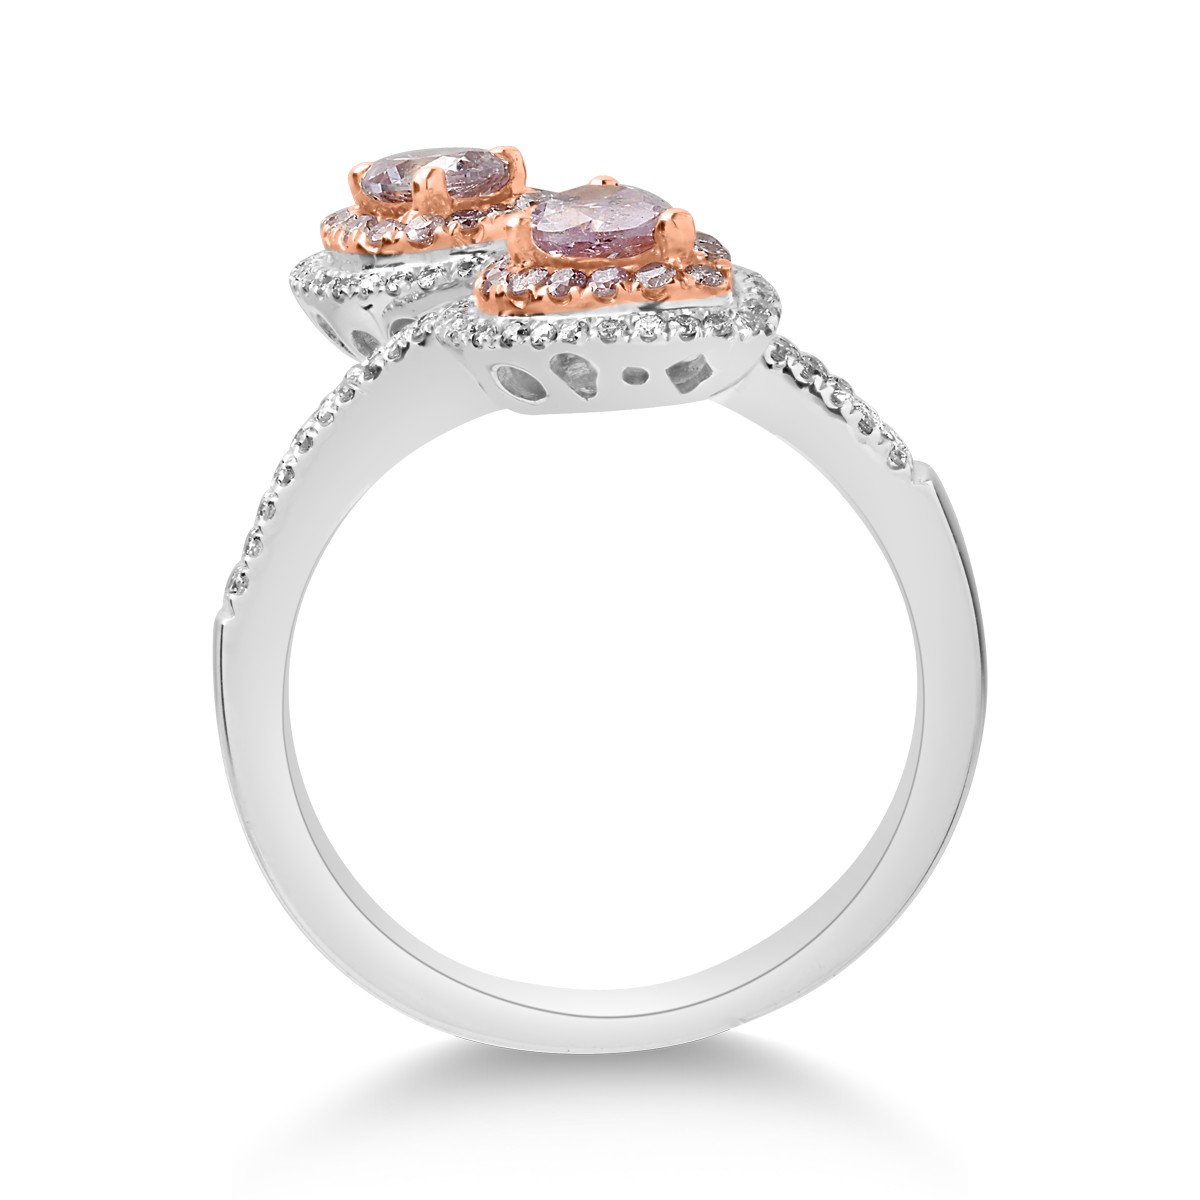 18K white-rose gold ring with 0.55ct pink diamonds and 0.35ct clear diamonds